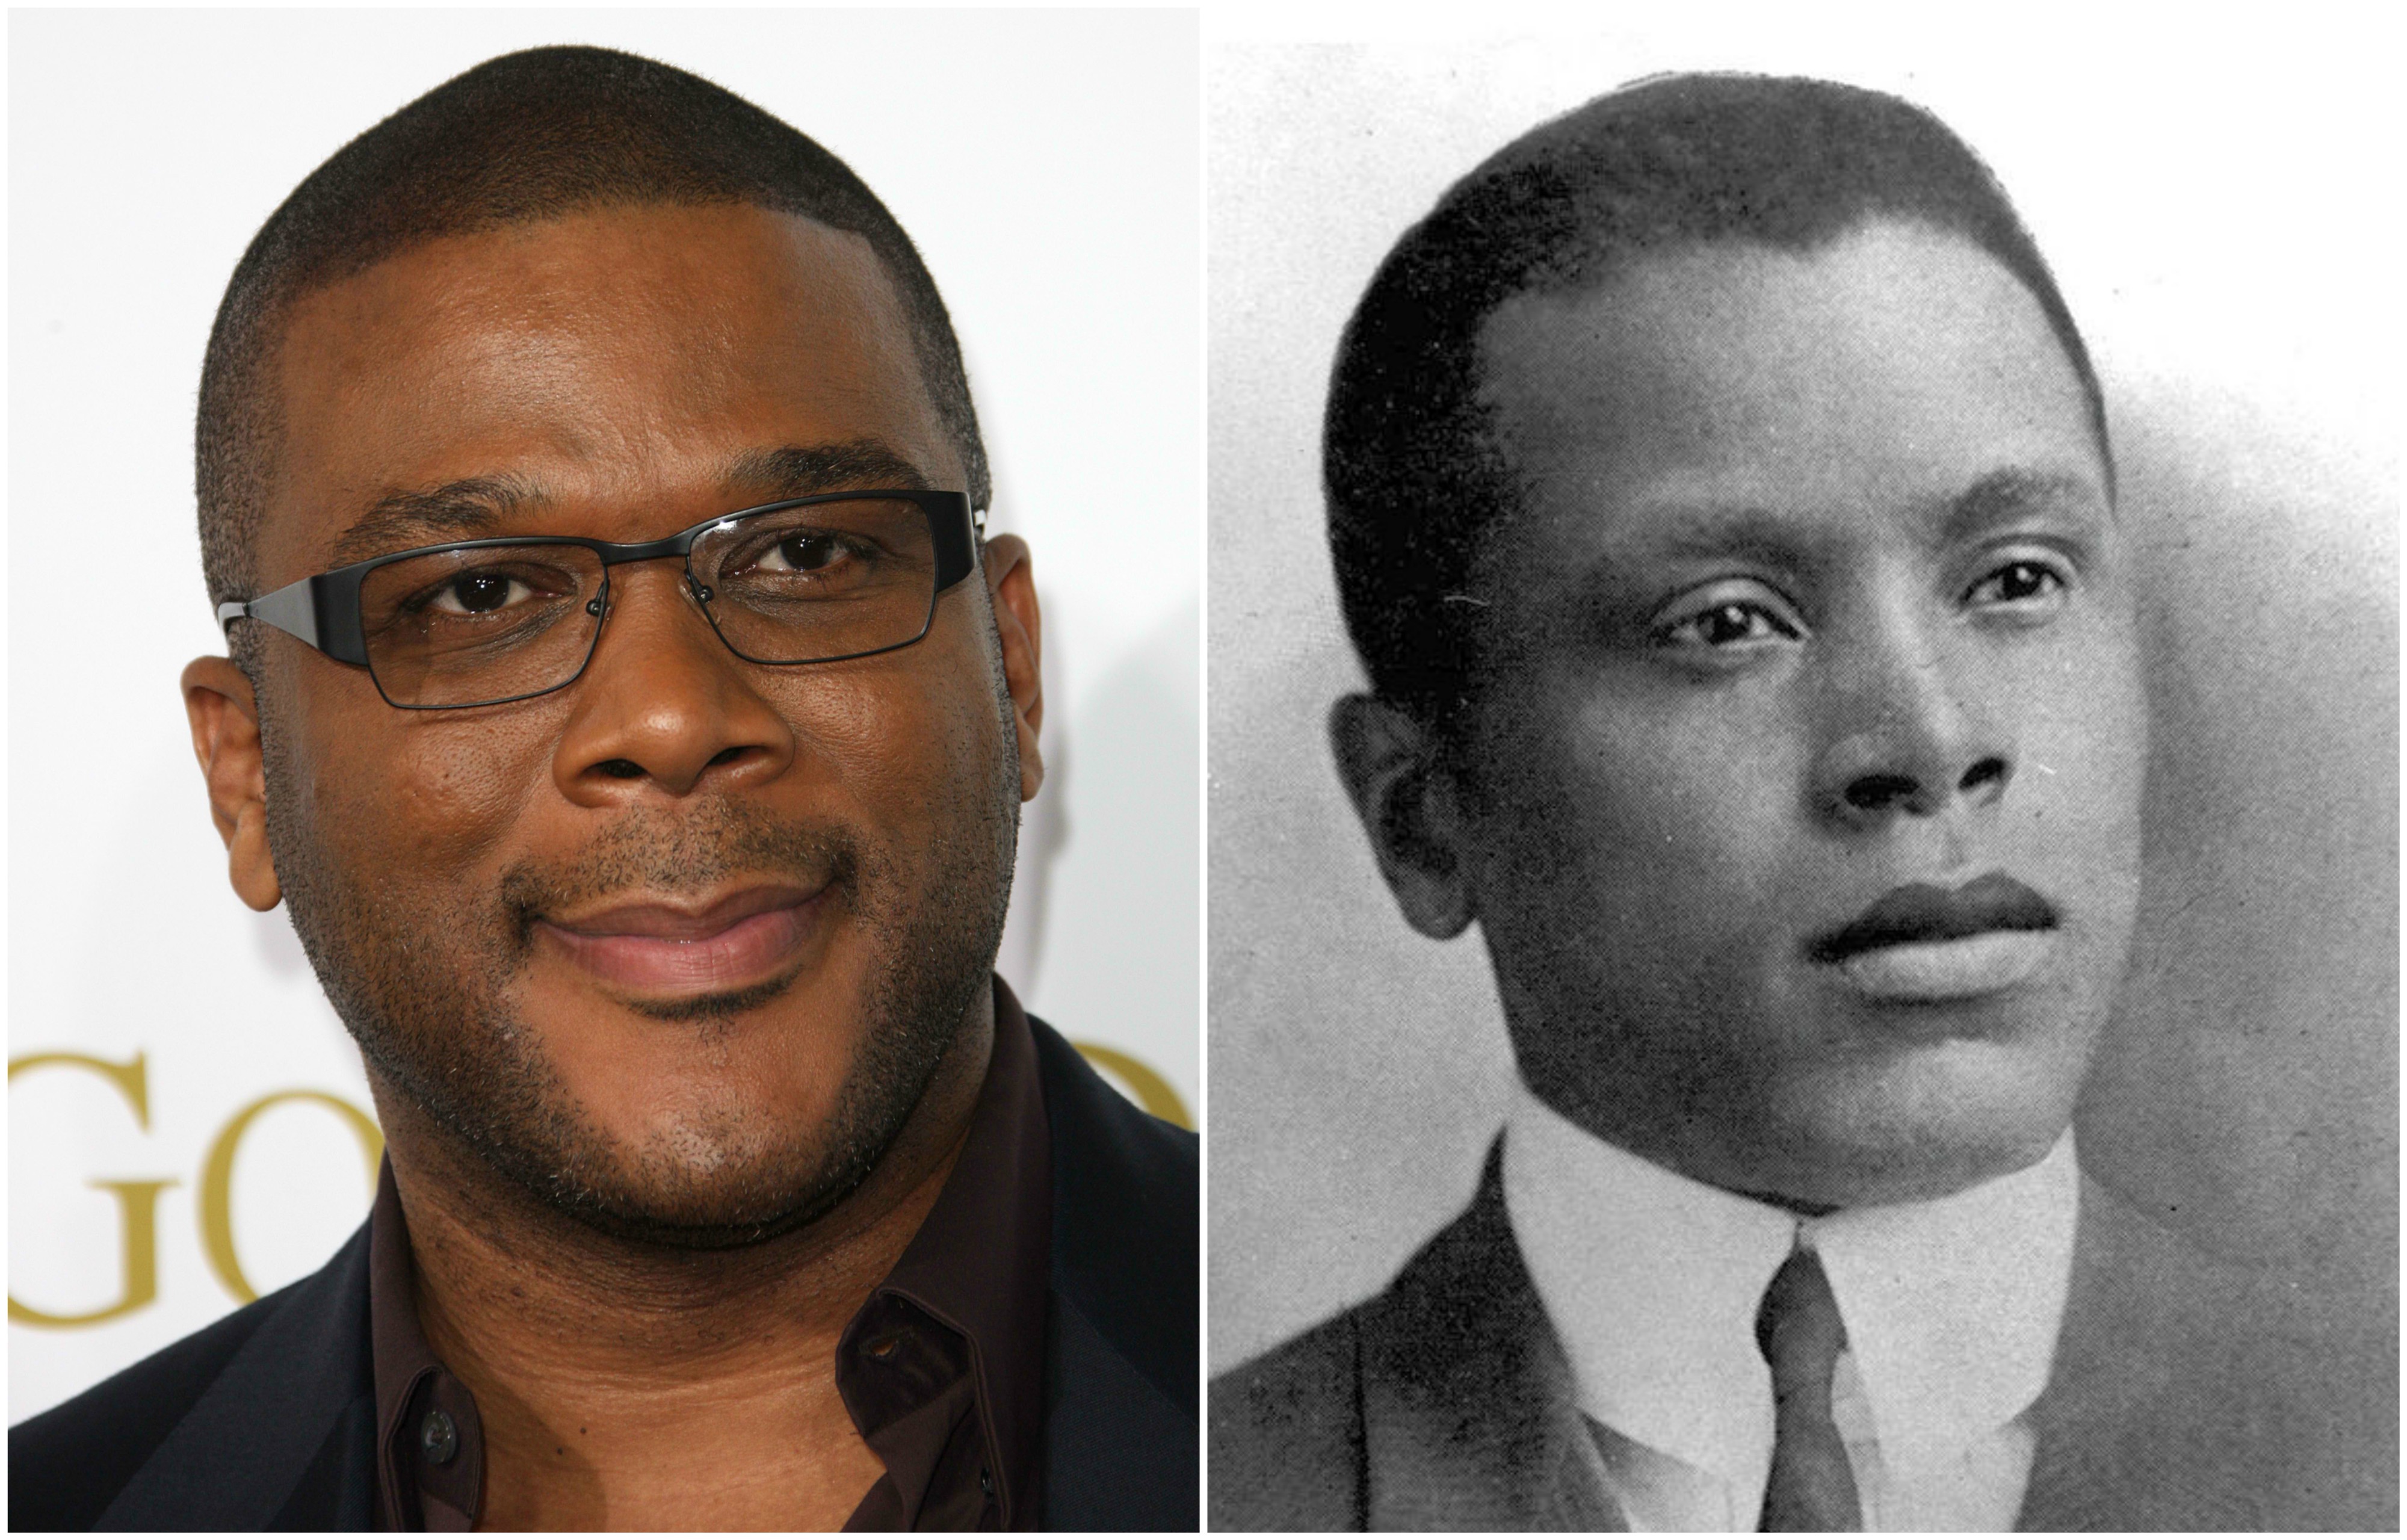 Tyler Perry To Play Pioneering African-American Film Maker Oscar Micheaux In New HBO Biopic